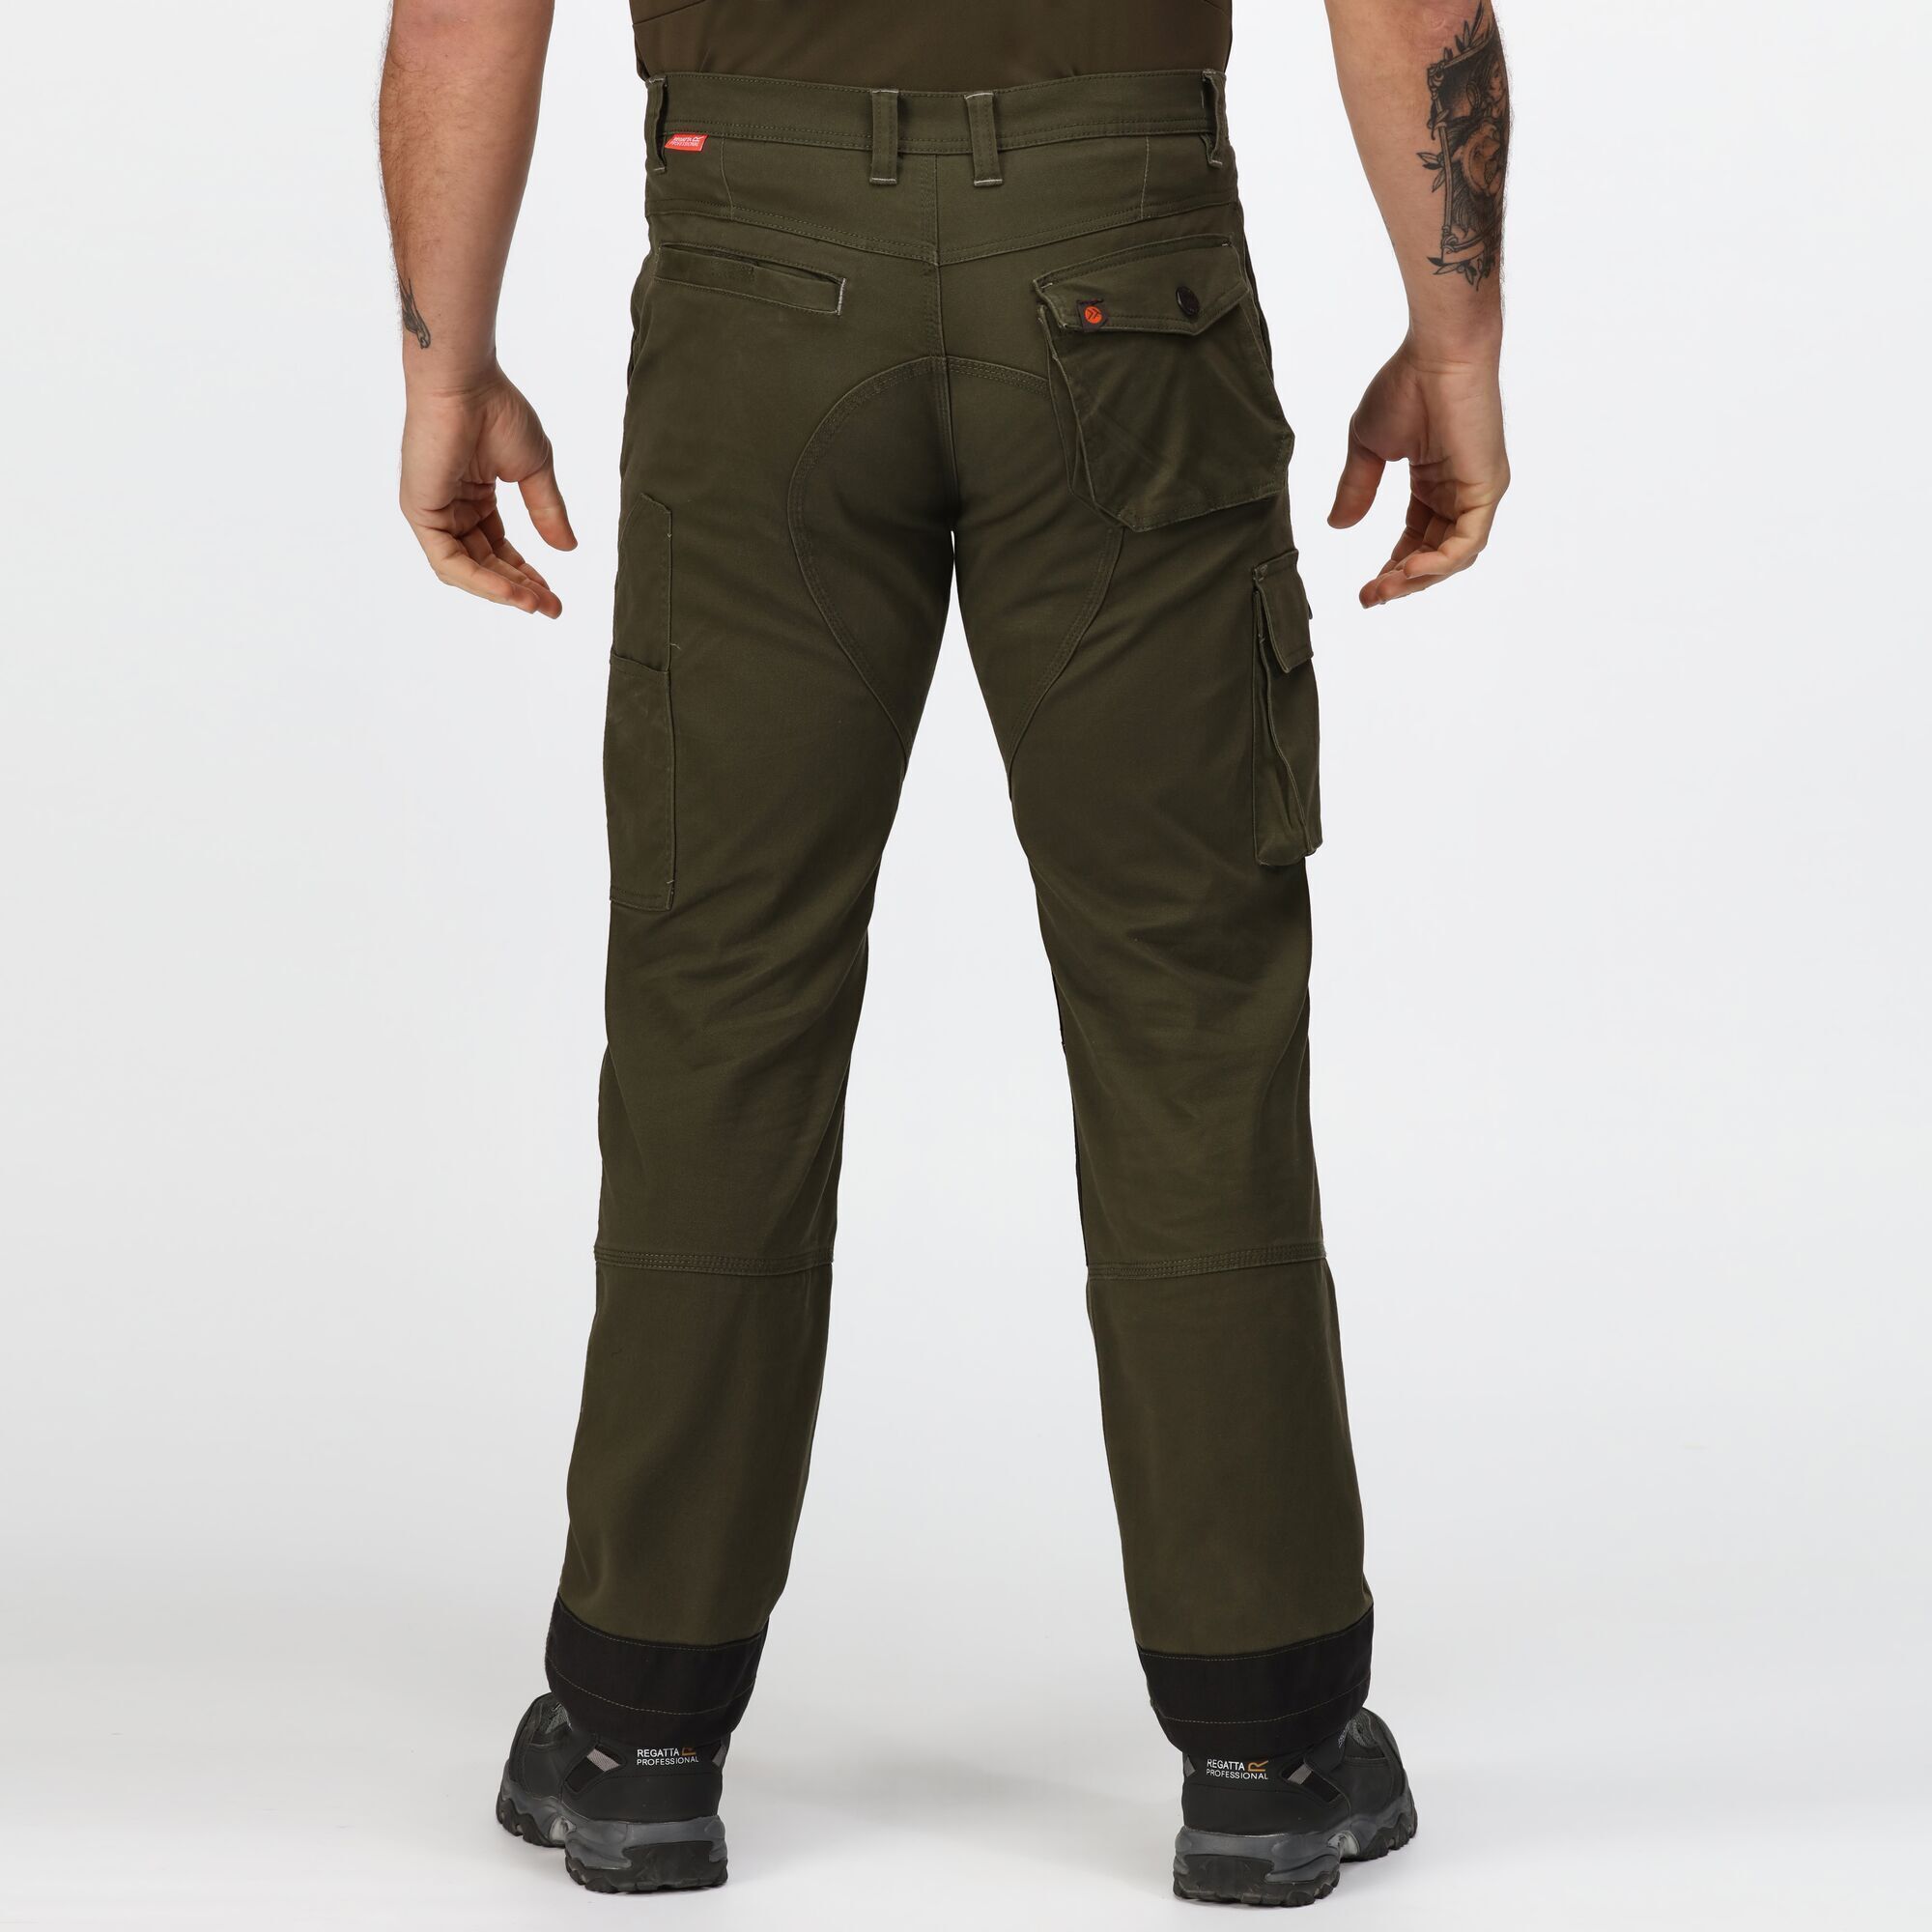 Mens work trousers with Cotton twill with stretch. Fabric weight 270gsm. Cordura bottom loading knee pockets. Belt loops. Reinforced seams with triple stitching. Reinforced crotch seam. 2 front pockets. 2 back pockets. Concealed zipped pocket. 1 cargo leg pocket. Side leg Ruler pocket. Reinforced hem overlays. Compatible with Tactical Threads. 2% Elastane, 98% Cotton. Regular: 32in.